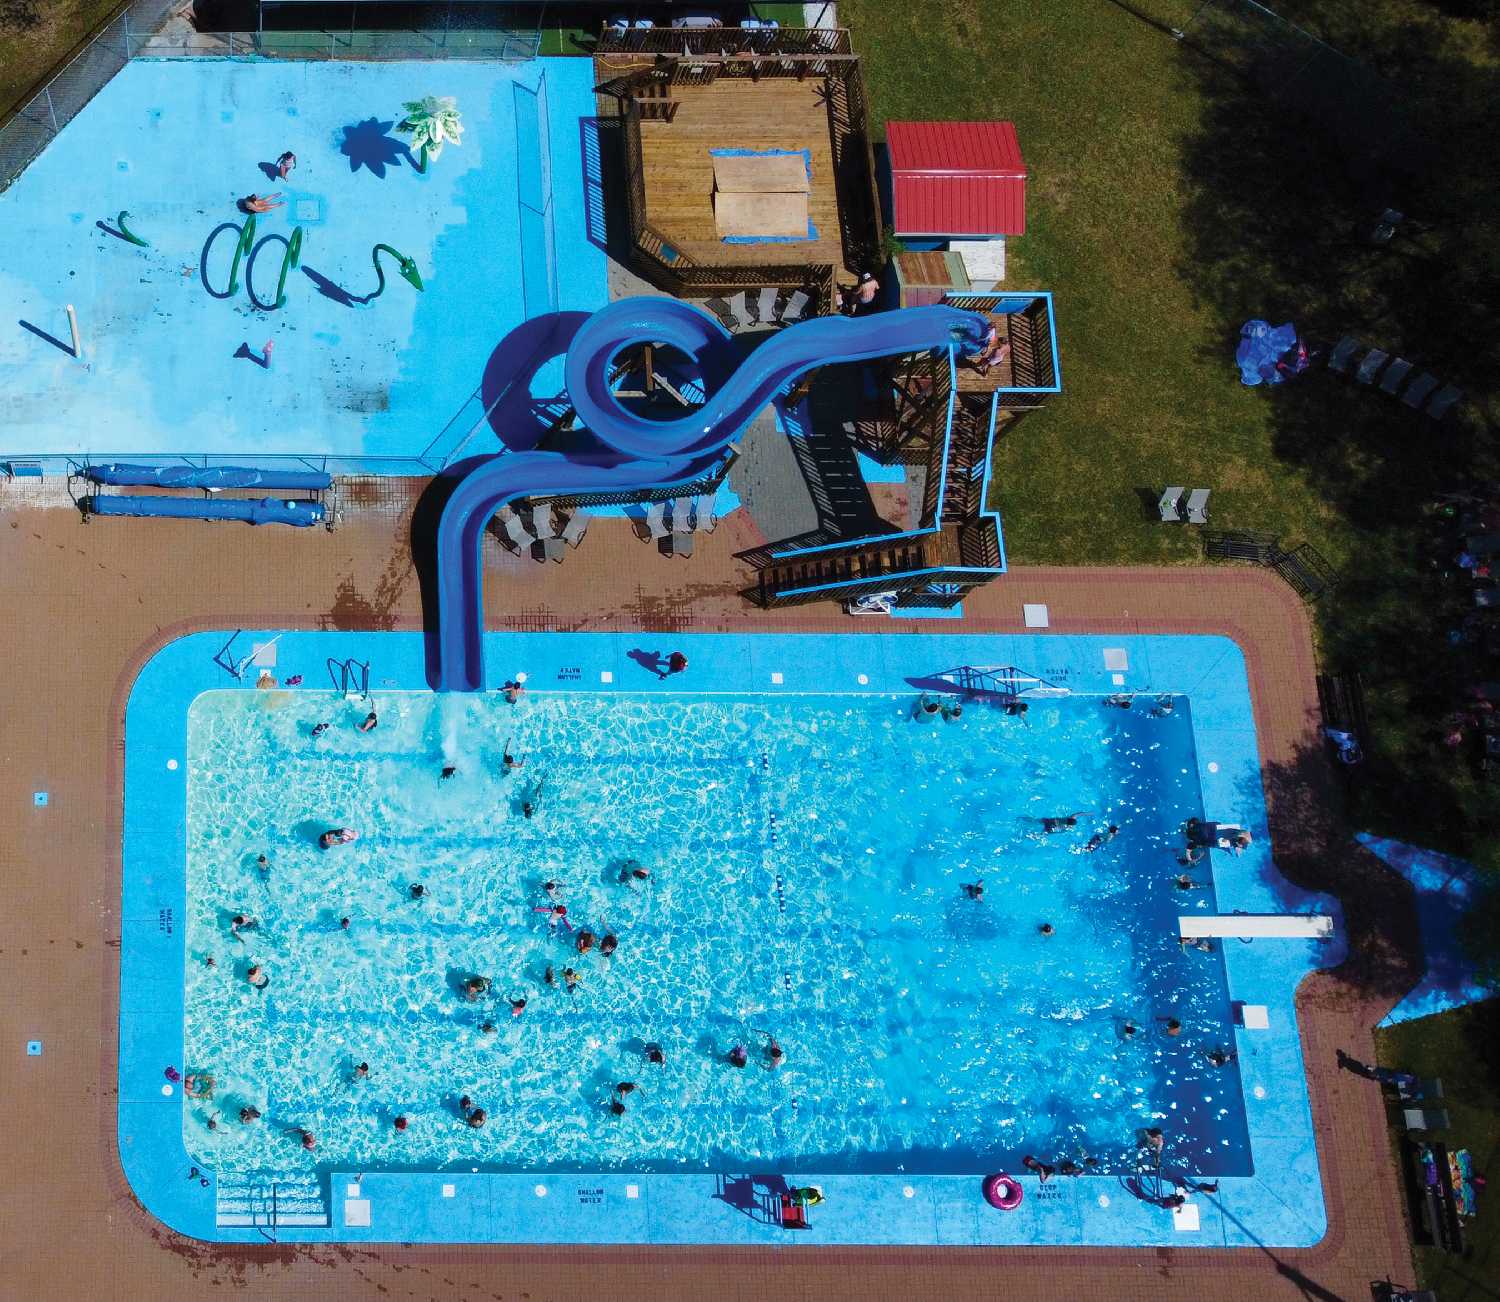 Earlier this year in June, Moosomin’s Swimming Pool re-opened and because of its increased number of swimming lessons and activities like pool parties and glow in the dark pool nights, business was busier than usual.